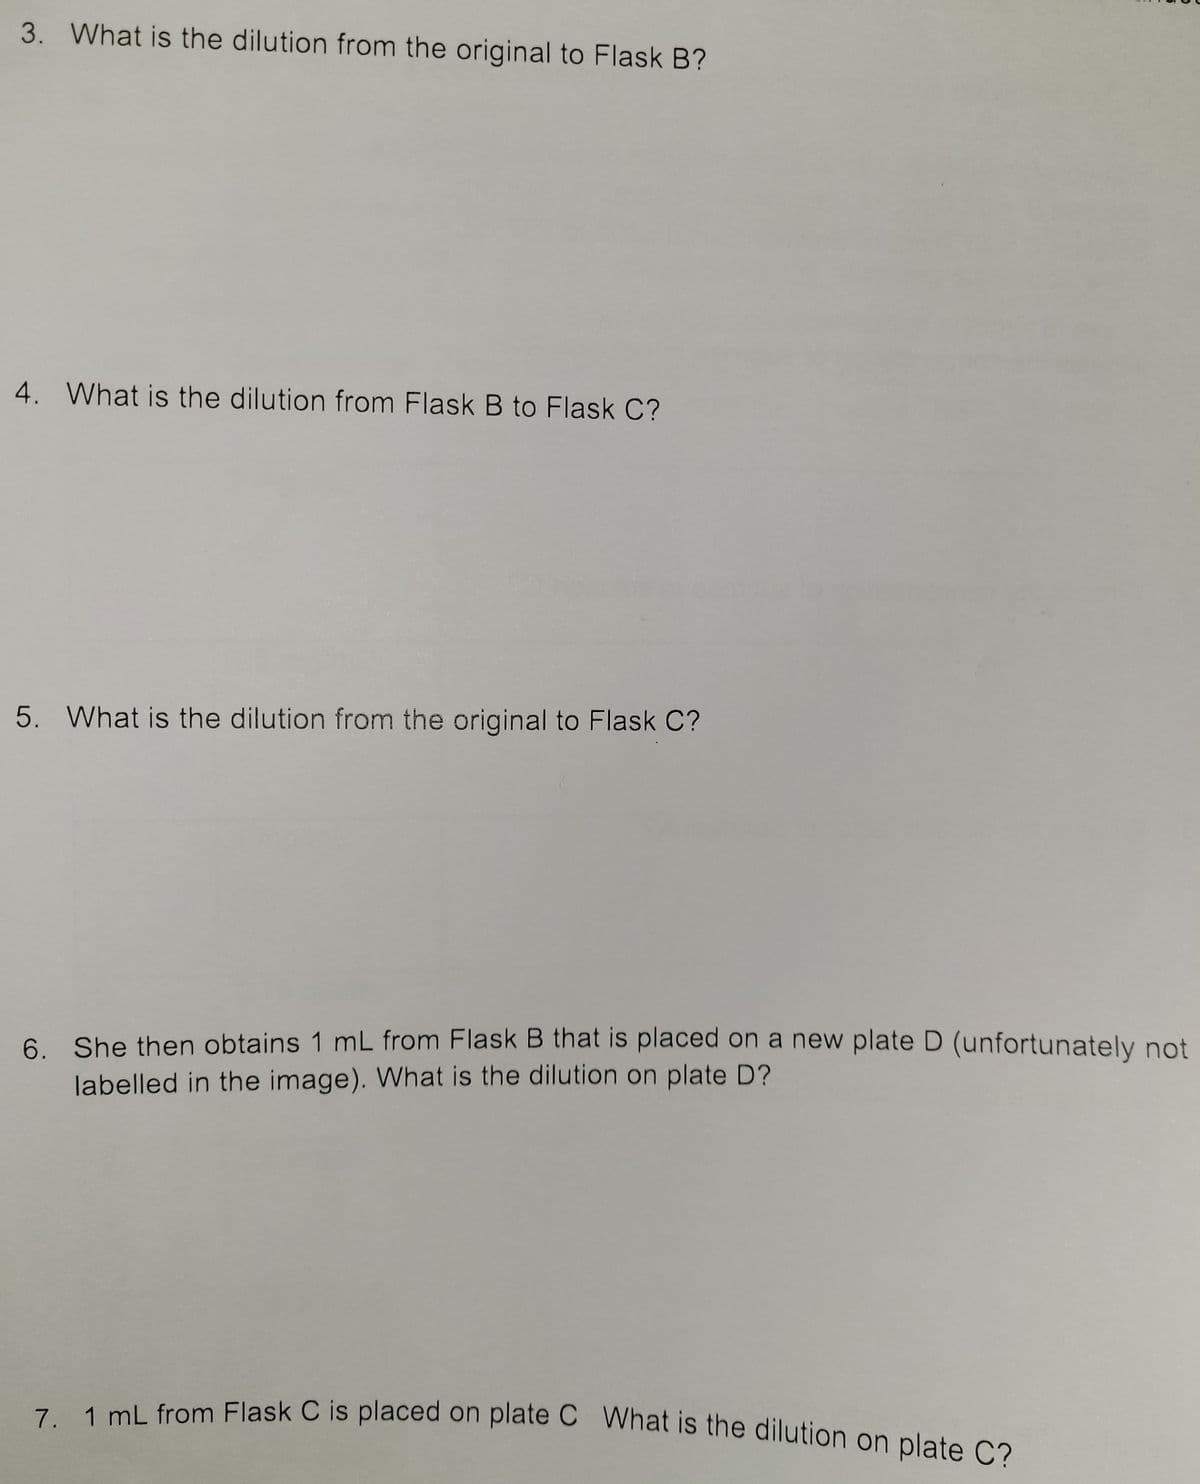 7. 1 mL from Flask C is placed on plate C What is the dilution on plate C?
3. What is the dilution from the original to Flask B?
4. What is the dilution from Flask B to Flask C?
5. What is the dilution from the original to Flask C?
6. She then obtains 1 mL from Flask B that is placed on a new plate D (unfortunately not
labelled in the image). What is the dilution on plate D?
